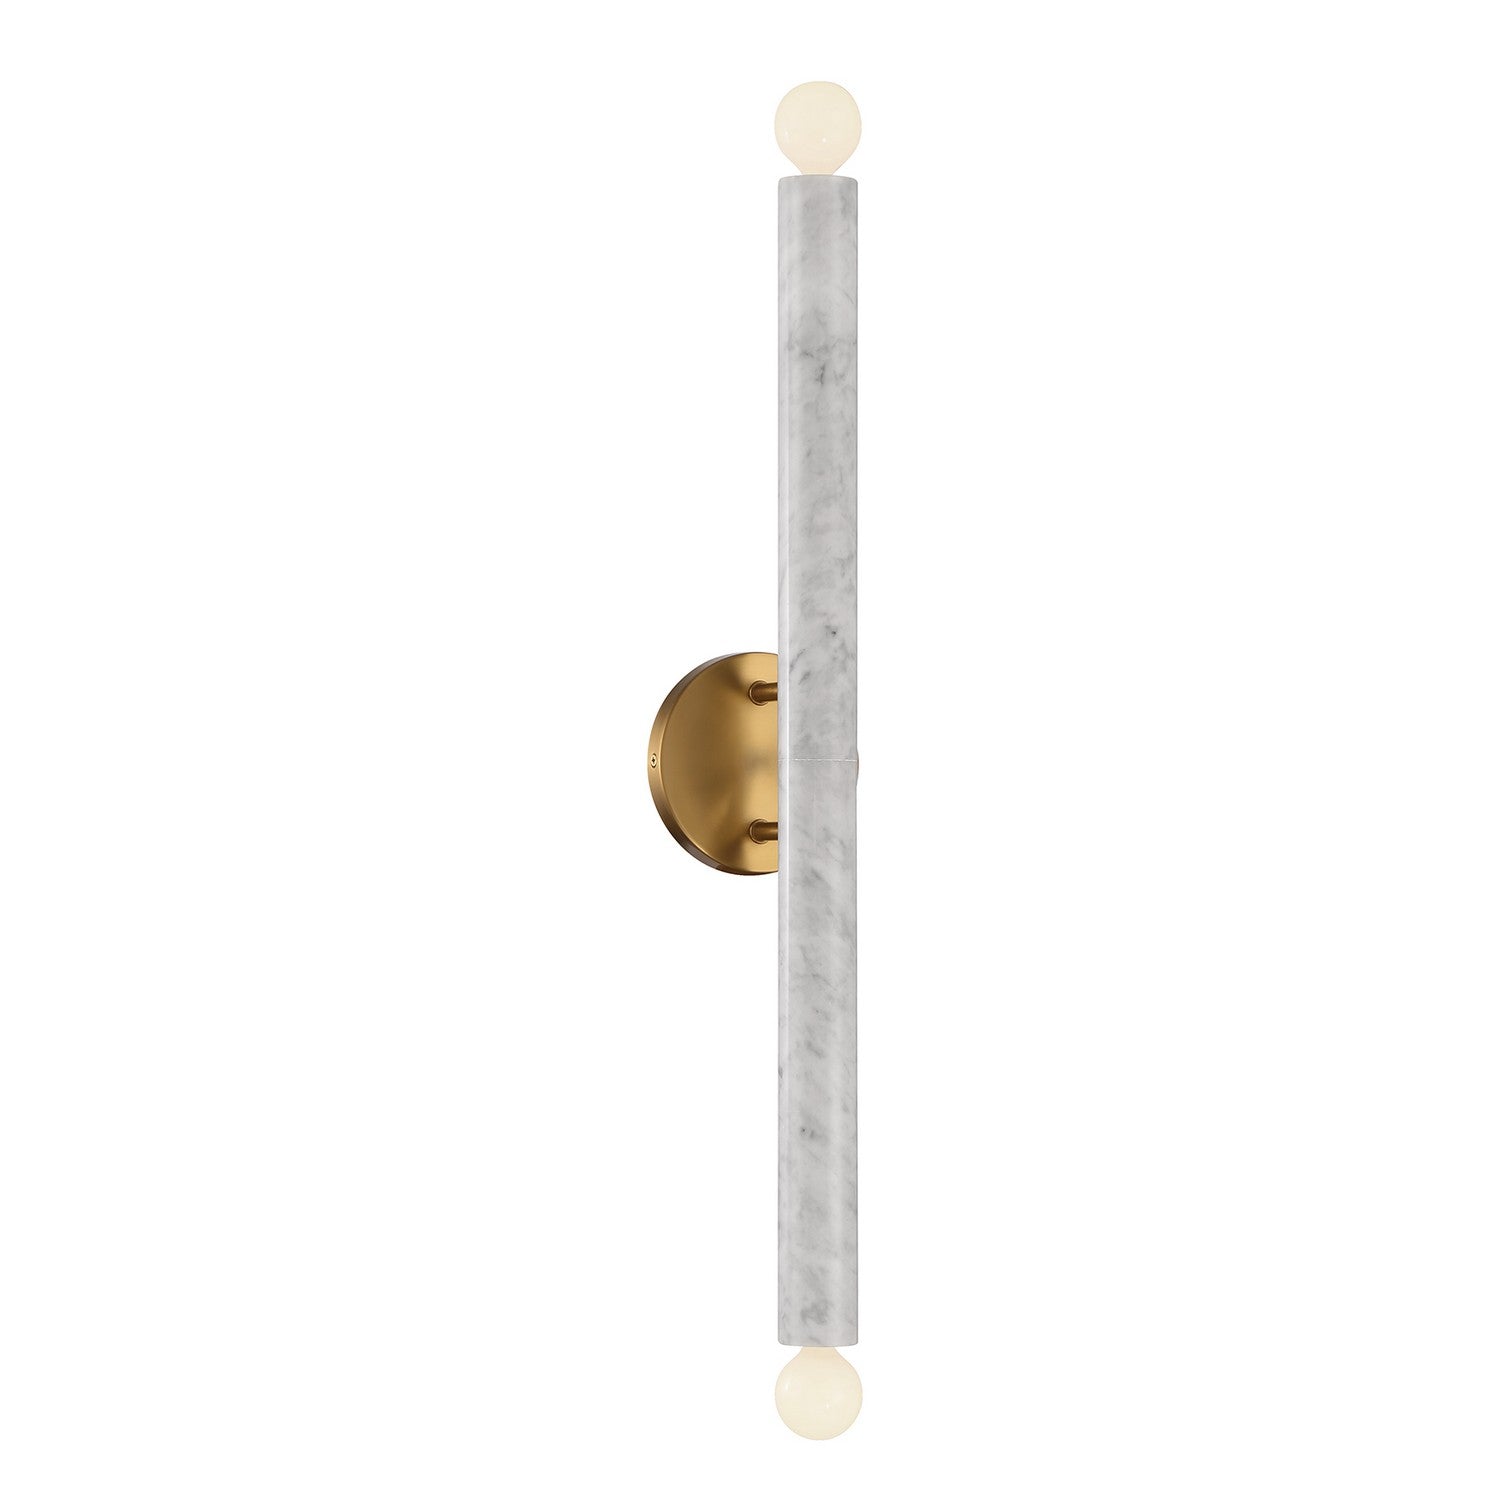 Savoy House - 9-2901-2-264 - Two Light Wall Sconce - Callaway - White Marble with Warm Brass